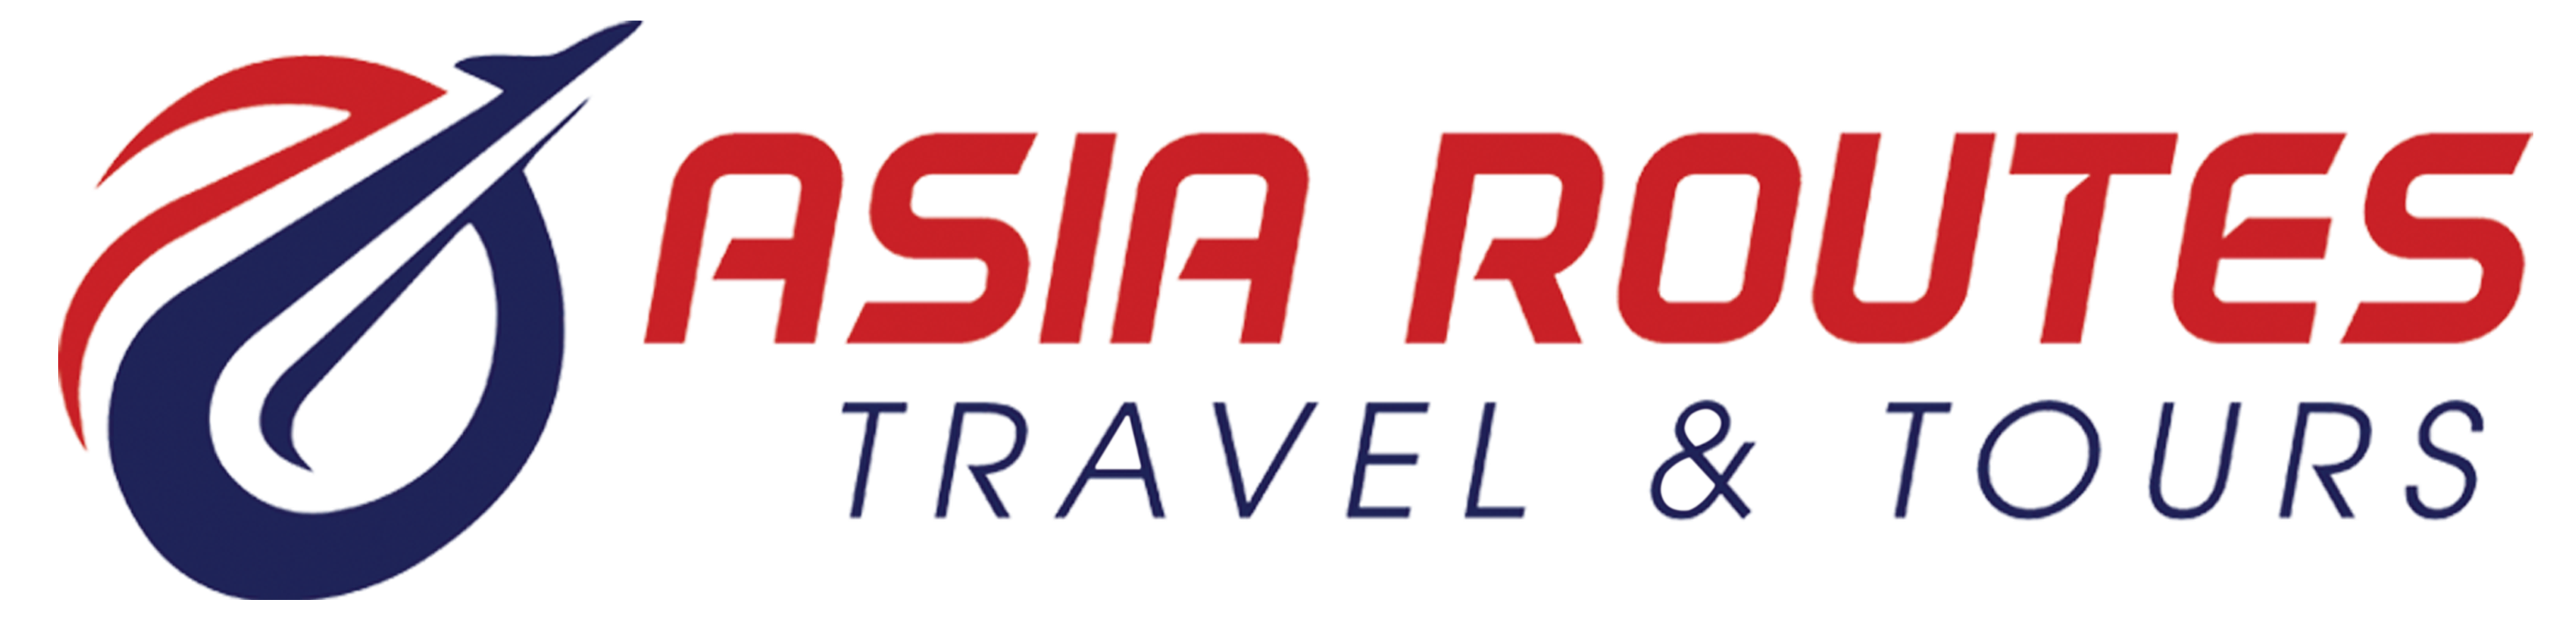 Asia Routes Travel & Tours |   Accommodations grid layouts